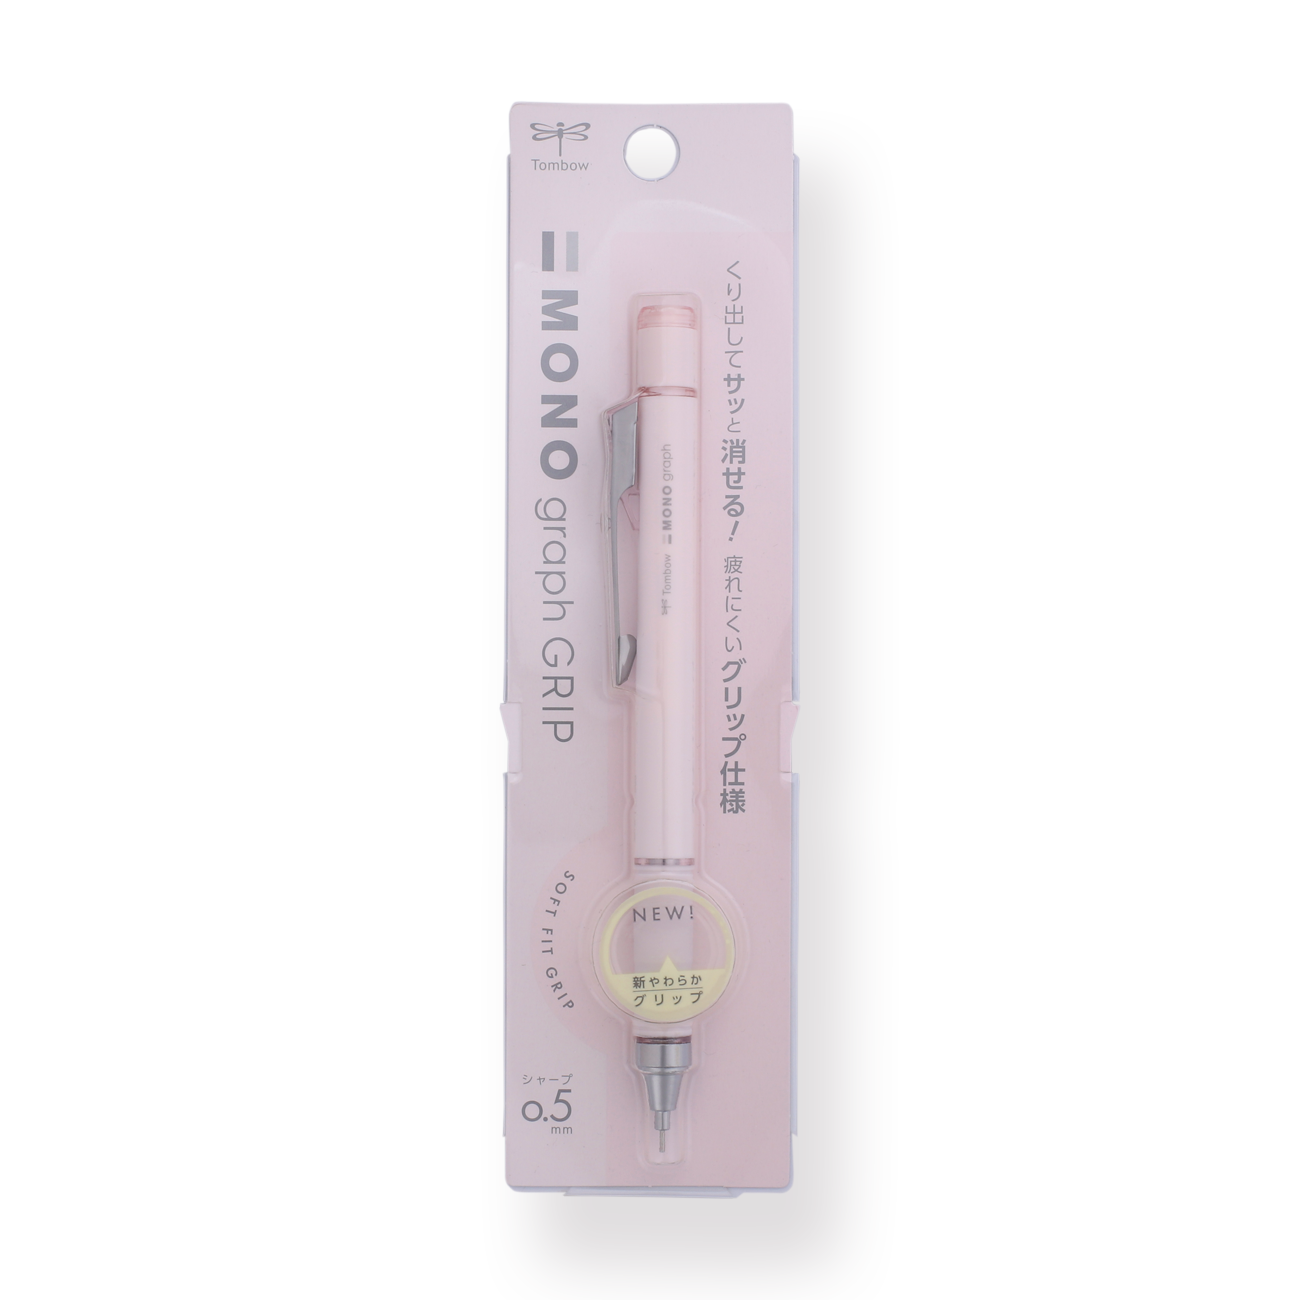 Tombow MONO Graph Grip Mechanical Pencil - 0.5 mm - Limited Color - Pale Pink